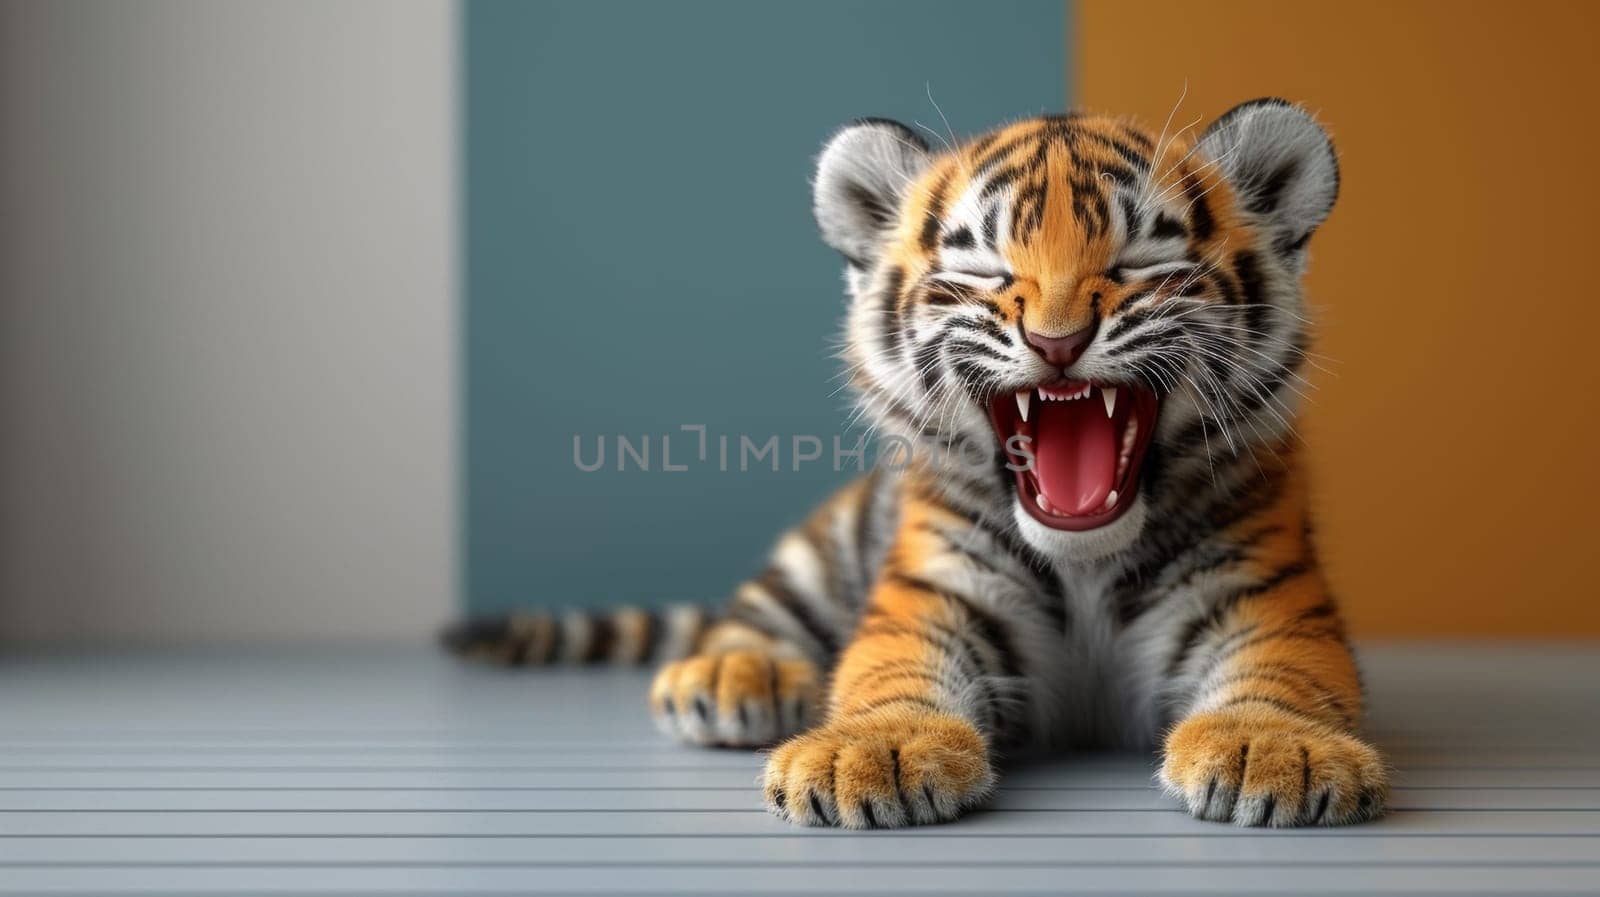 A tiger cub yawning on a table with its mouth open